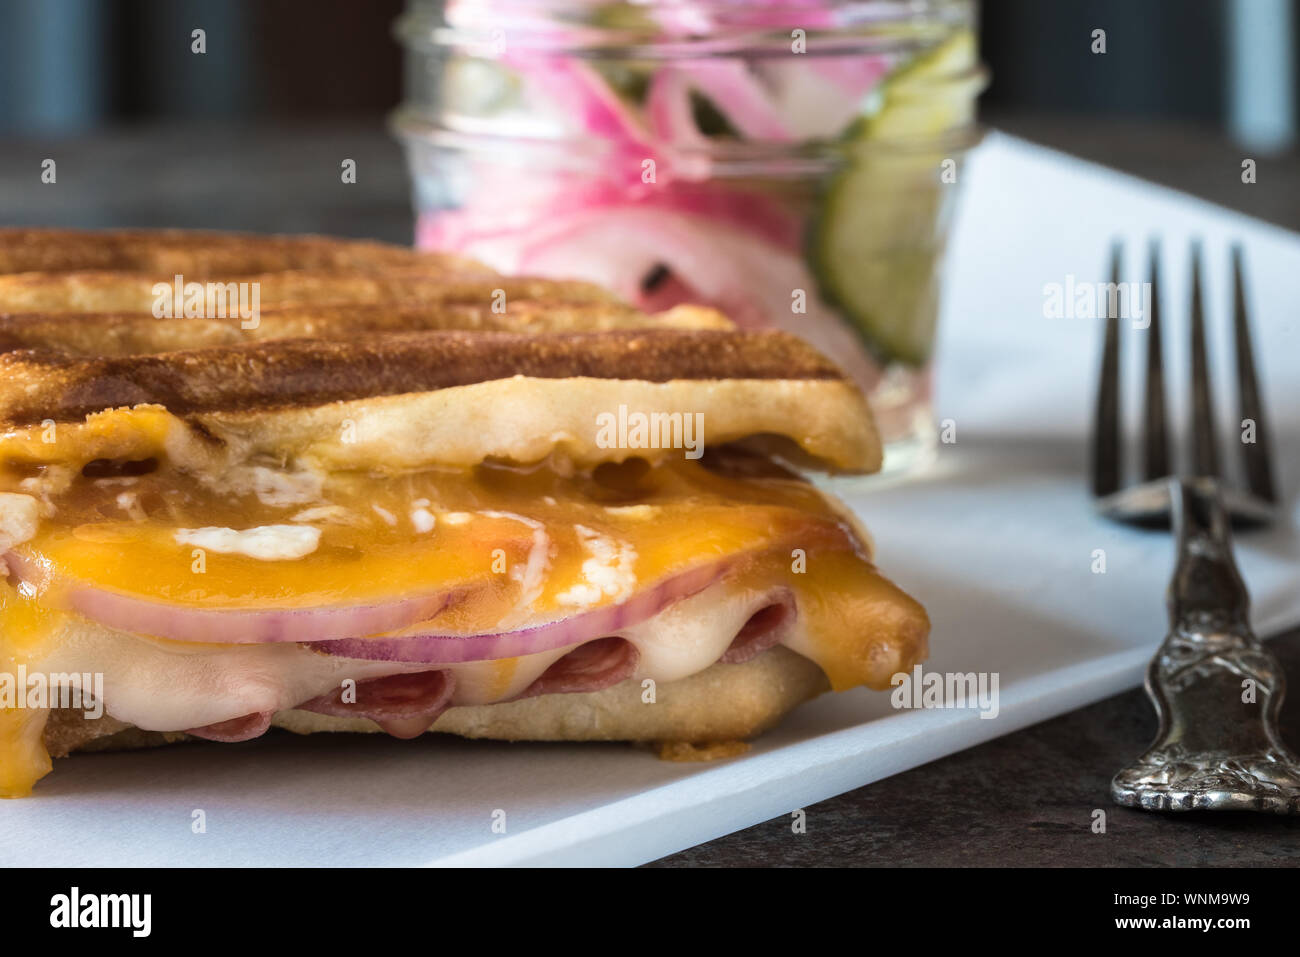 Close-up Of Panini Sandwich In Plate With Relish In Background Stock Photo